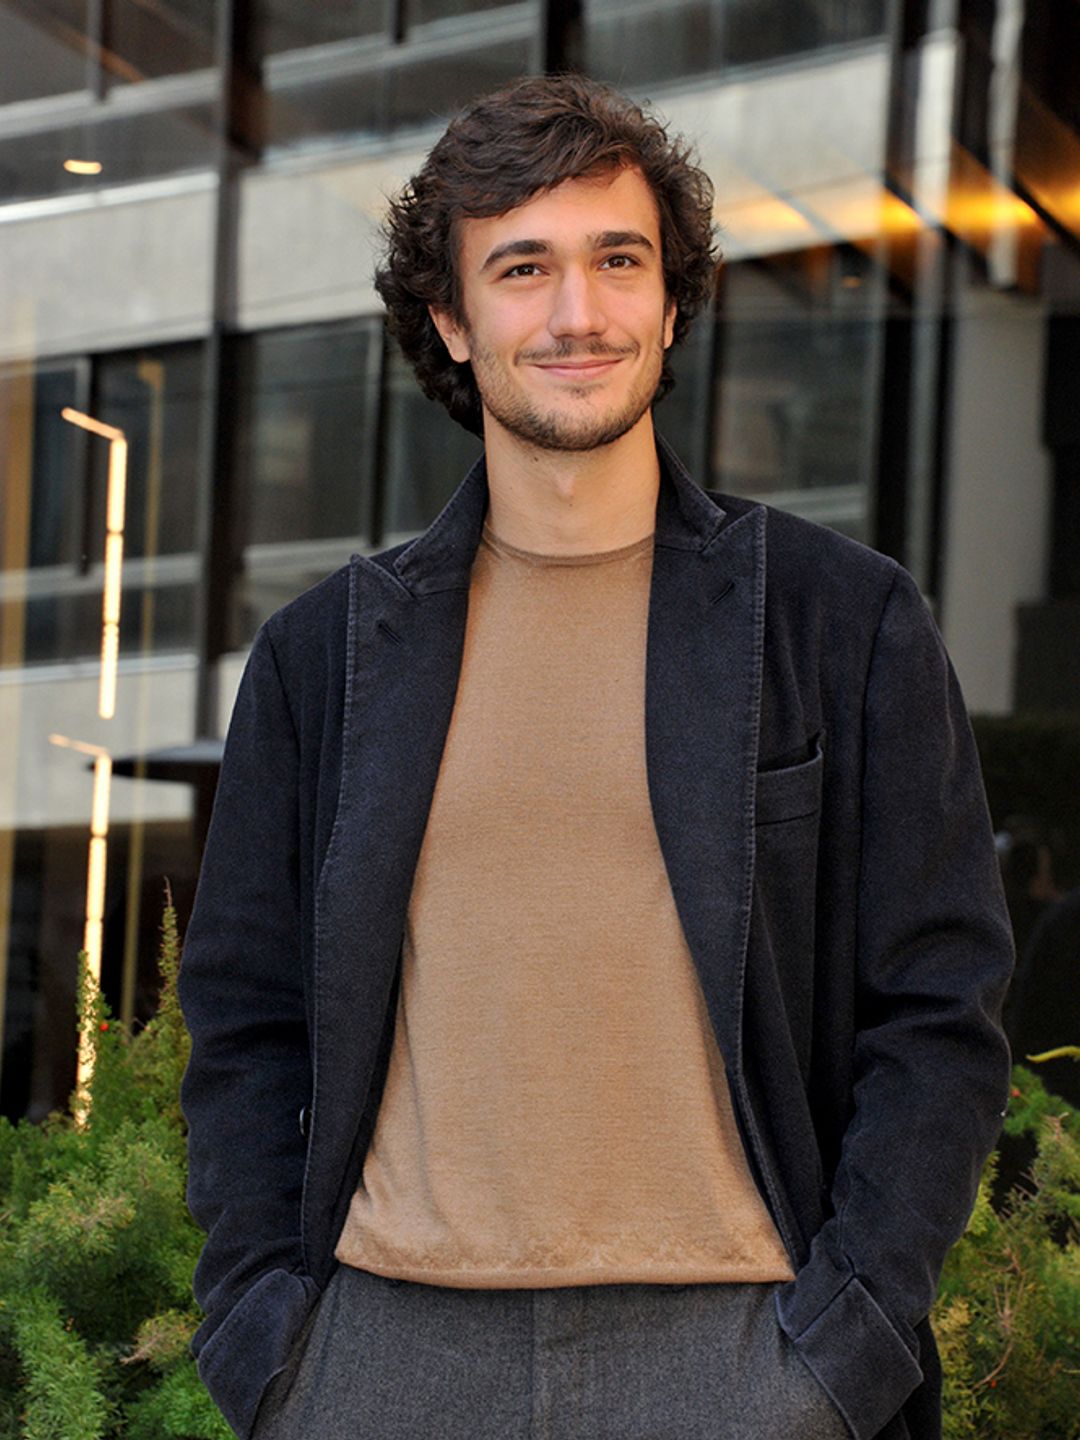 Eugenio Franceschini at a photocall in Rome 2016